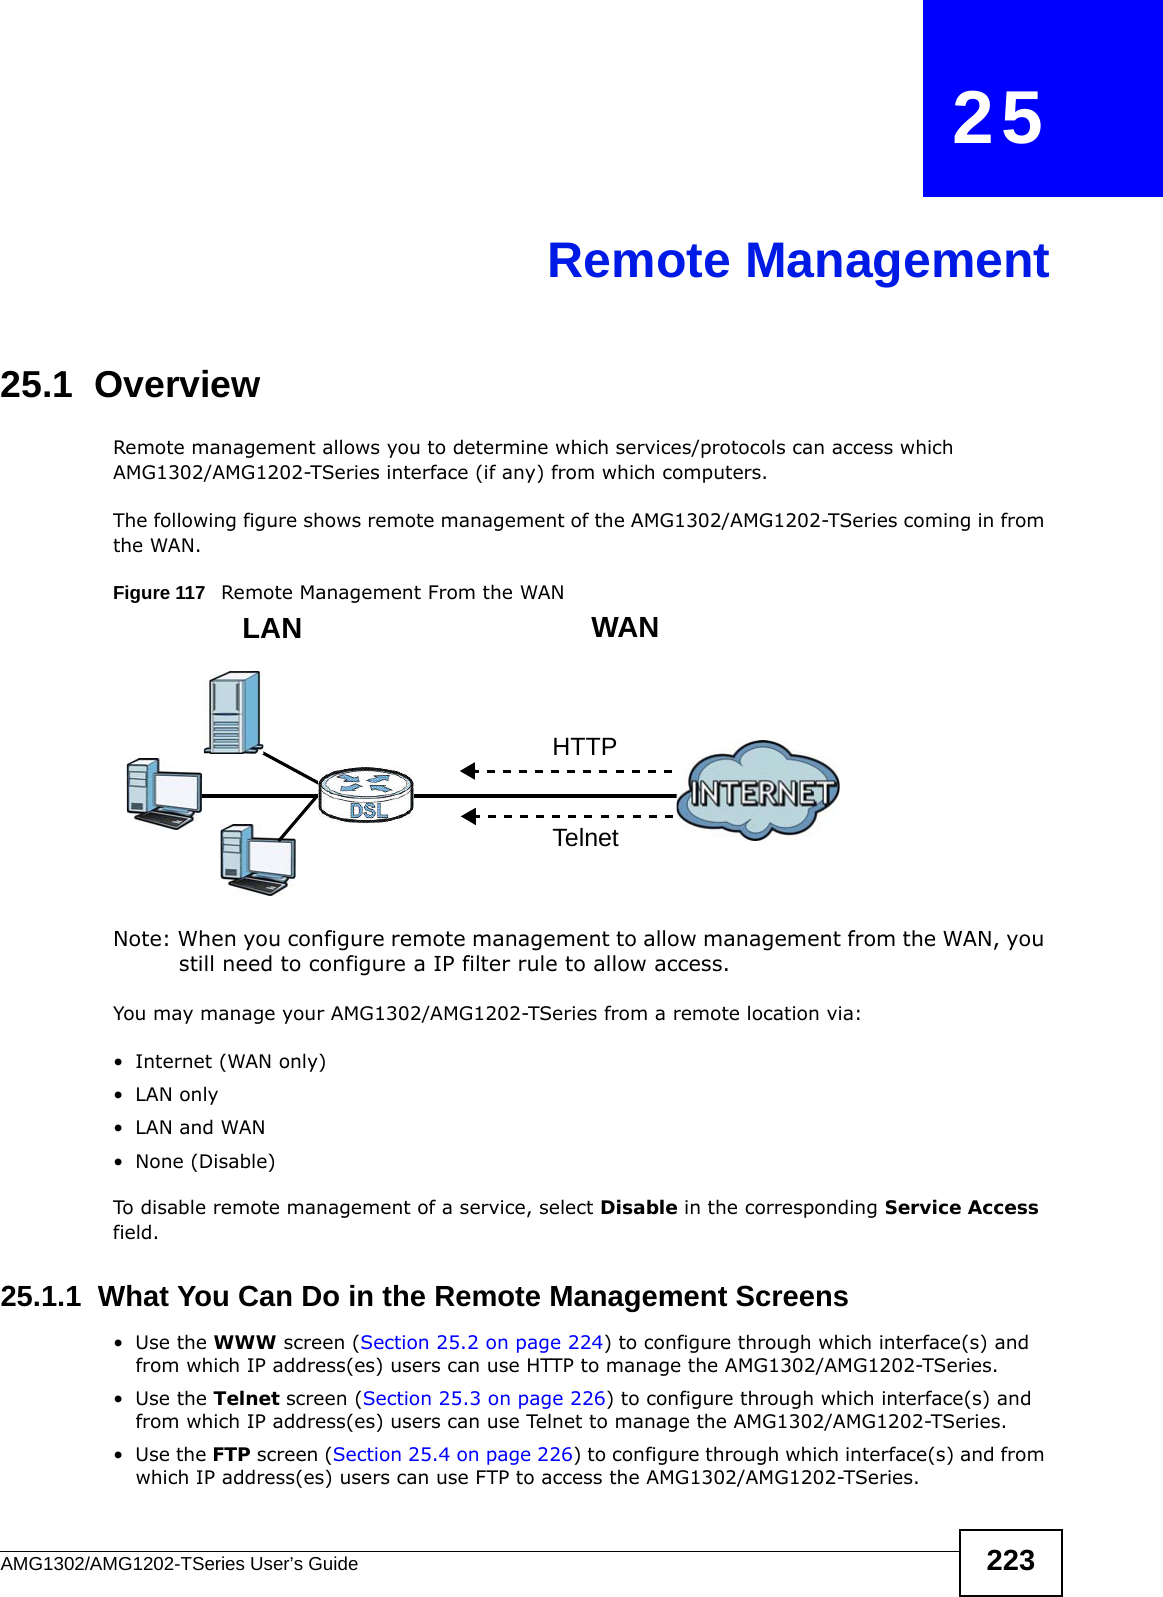 AMG1302/AMG1202-TSeries User’s Guide 223CHAPTER   25Remote Management25.1  OverviewRemote management allows you to determine which services/protocols can access which AMG1302/AMG1202-TSeries interface (if any) from which computers.The following figure shows remote management of the AMG1302/AMG1202-TSeries coming in from the WAN.Figure 117   Remote Management From the WANNote: When you configure remote management to allow management from the WAN, you still need to configure a IP filter rule to allow access.You may manage your AMG1302/AMG1202-TSeries from a remote location via:• Internet (WAN only)•LAN only•LAN and WAN• None (Disable)To disable remote management of a service, select Disable in the corresponding Service Access field.25.1.1  What You Can Do in the Remote Management Screens•Use the WWW screen (Section 25.2 on page 224) to configure through which interface(s) and from which IP address(es) users can use HTTP to manage the AMG1302/AMG1202-TSeries.•Use the Telnet screen (Section 25.3 on page 226) to configure through which interface(s) and from which IP address(es) users can use Telnet to manage the AMG1302/AMG1202-TSeries.•Use the FTP screen (Section 25.4 on page 226) to configure through which interface(s) and from which IP address(es) users can use FTP to access the AMG1302/AMG1202-TSeries.LAN WANHTTPTelnet